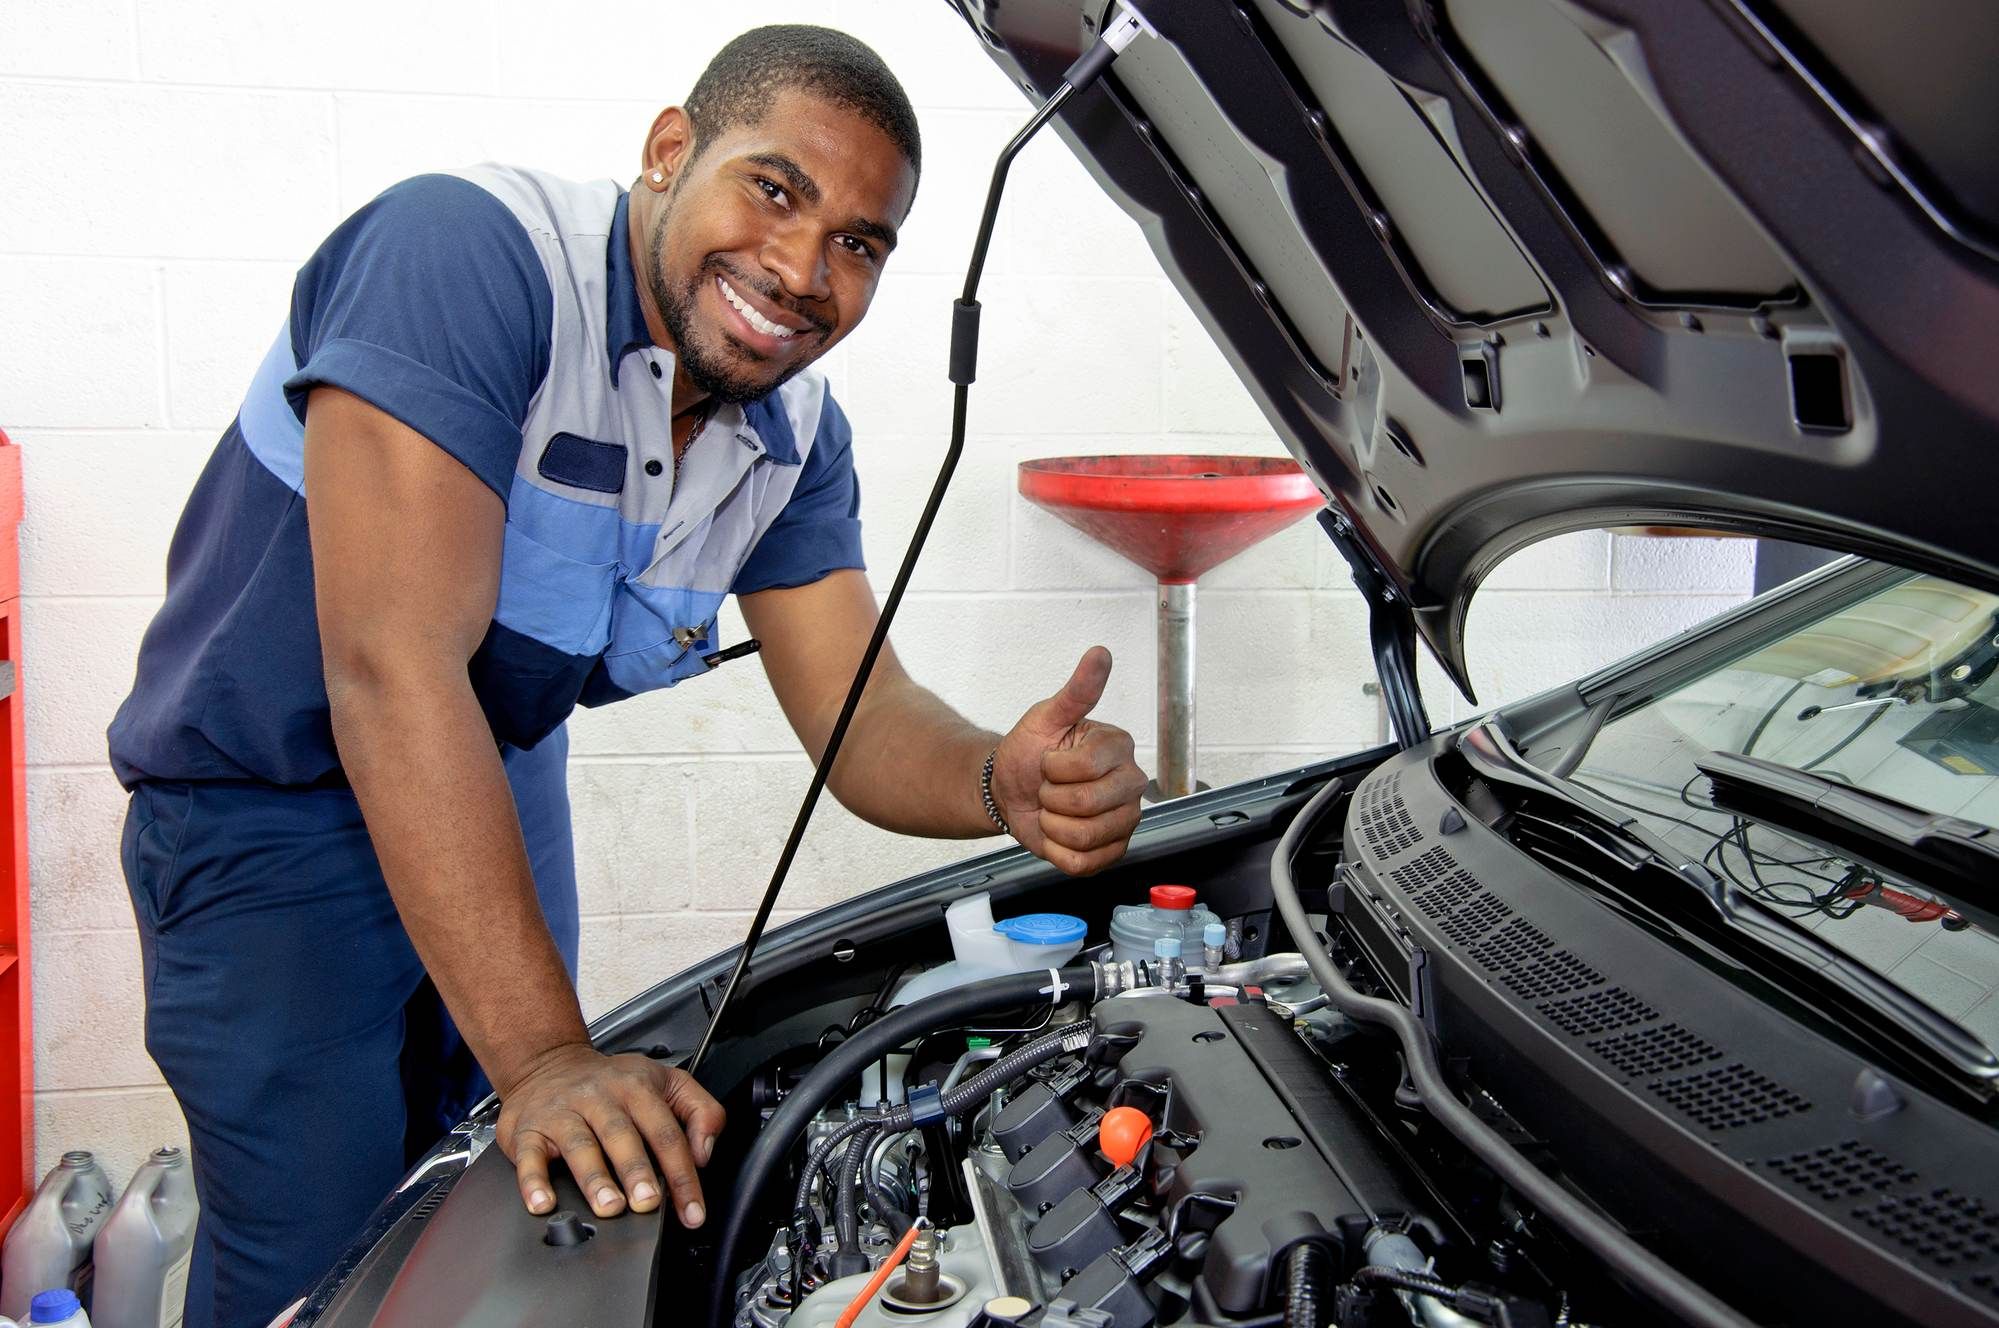 Auto technician gives a thumbs up as he works under hood of a car